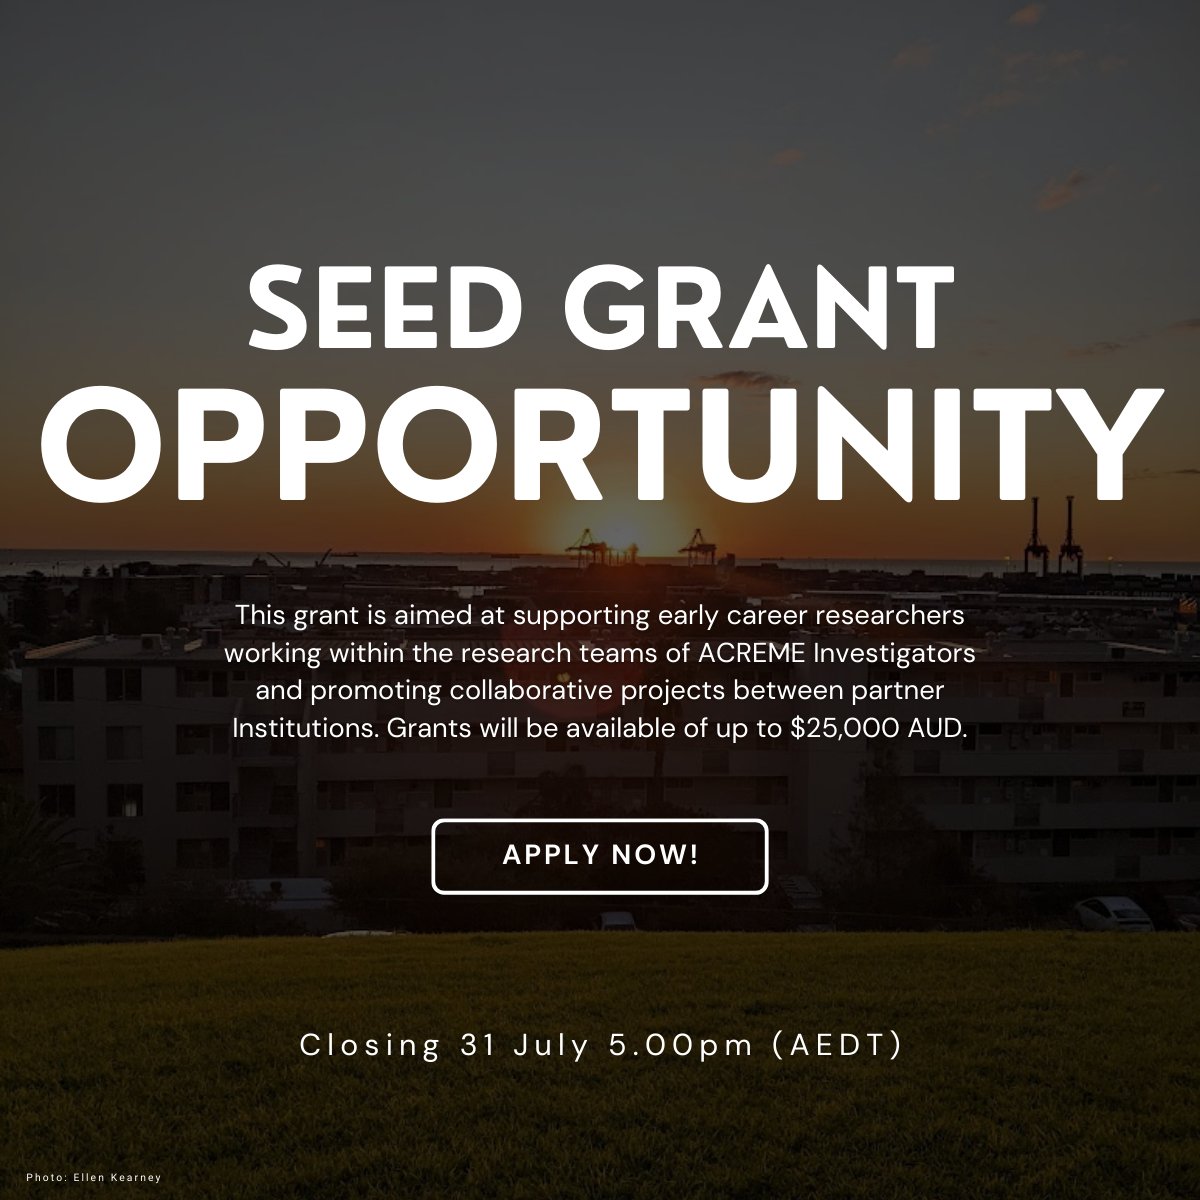 We're offering research funding for pilot projects that fall within the three key research themes. The Seed Grant scheme is aimed at supporting ECRs working within the research teams of ACREME Investigators. For more info: acreme.edu.au/resources/seed… #malaria #globalhealth #research